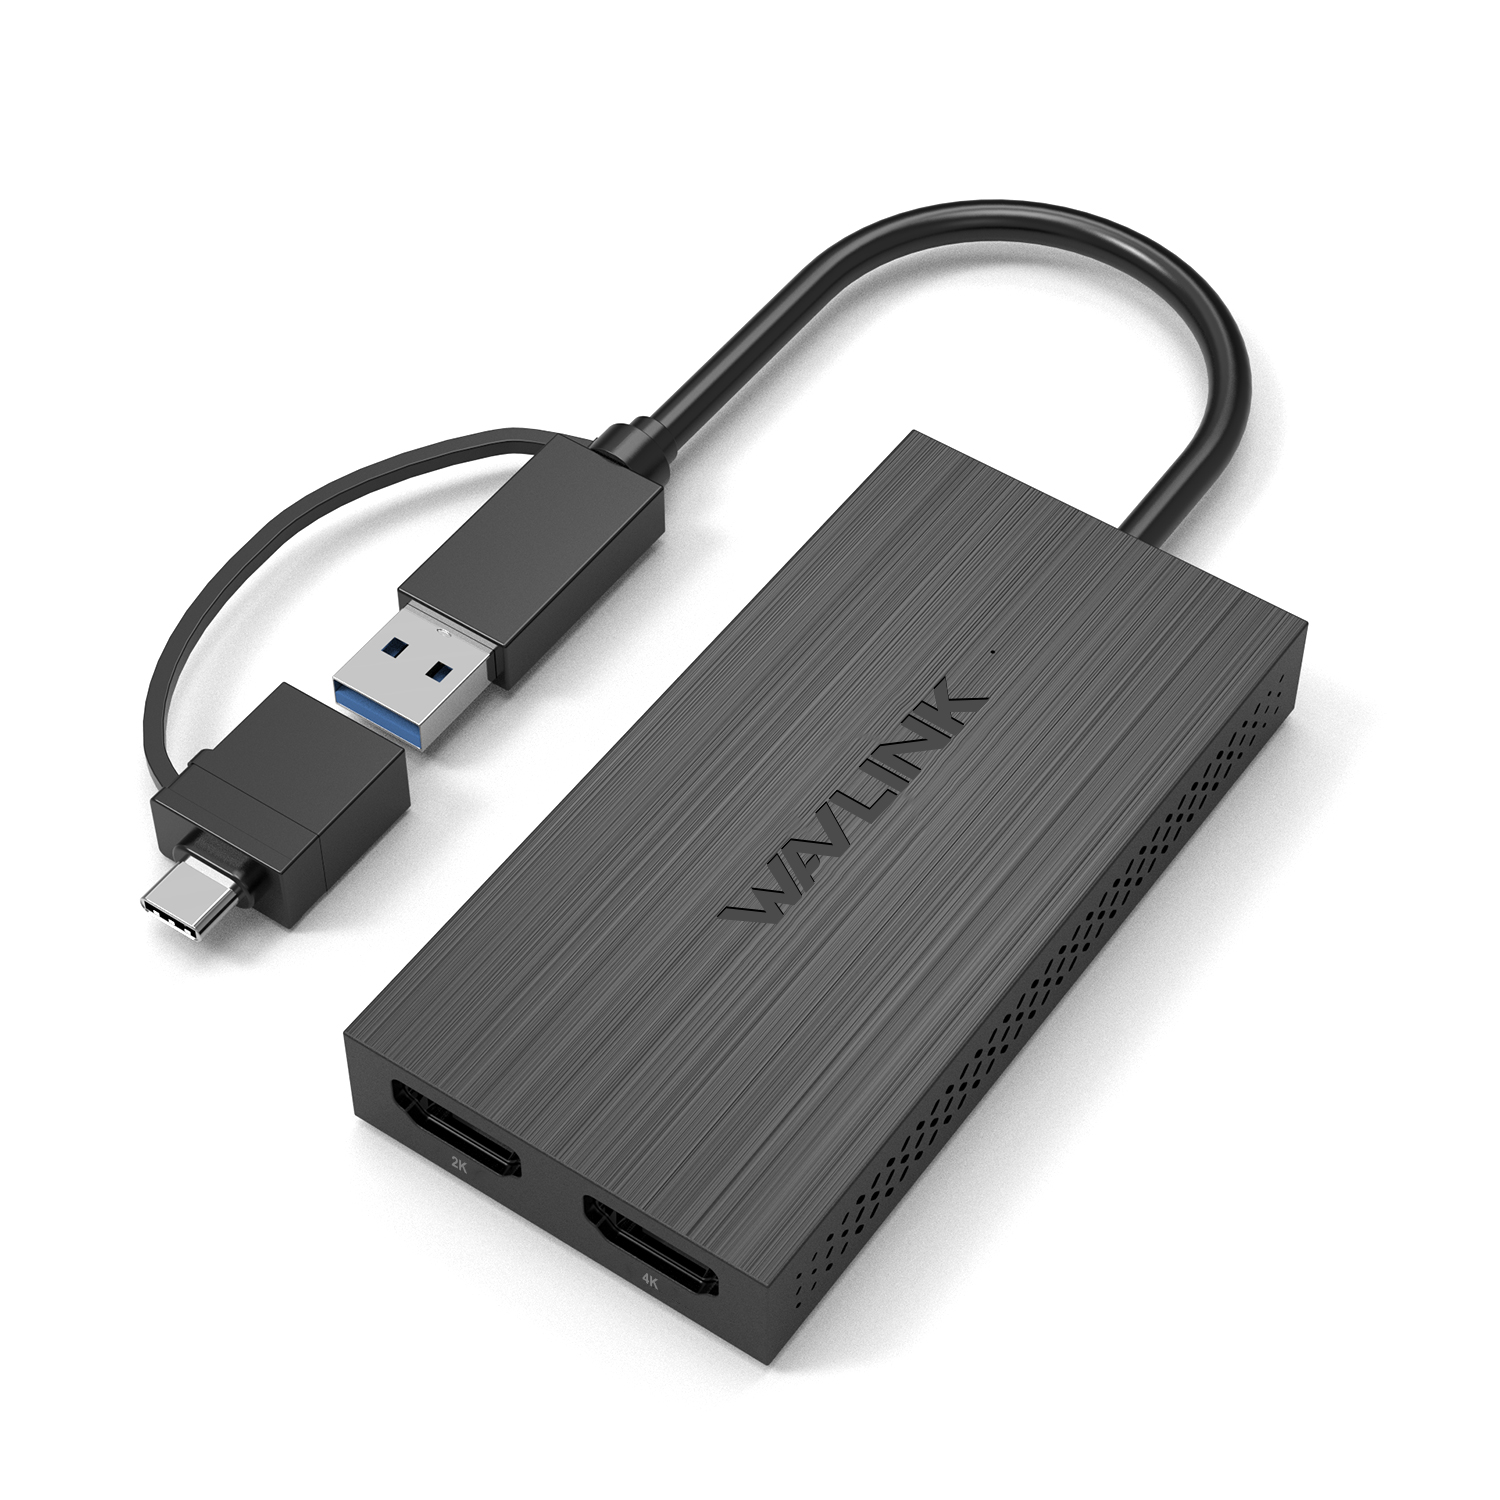 HDMI to USB-C Video Capture Adapter